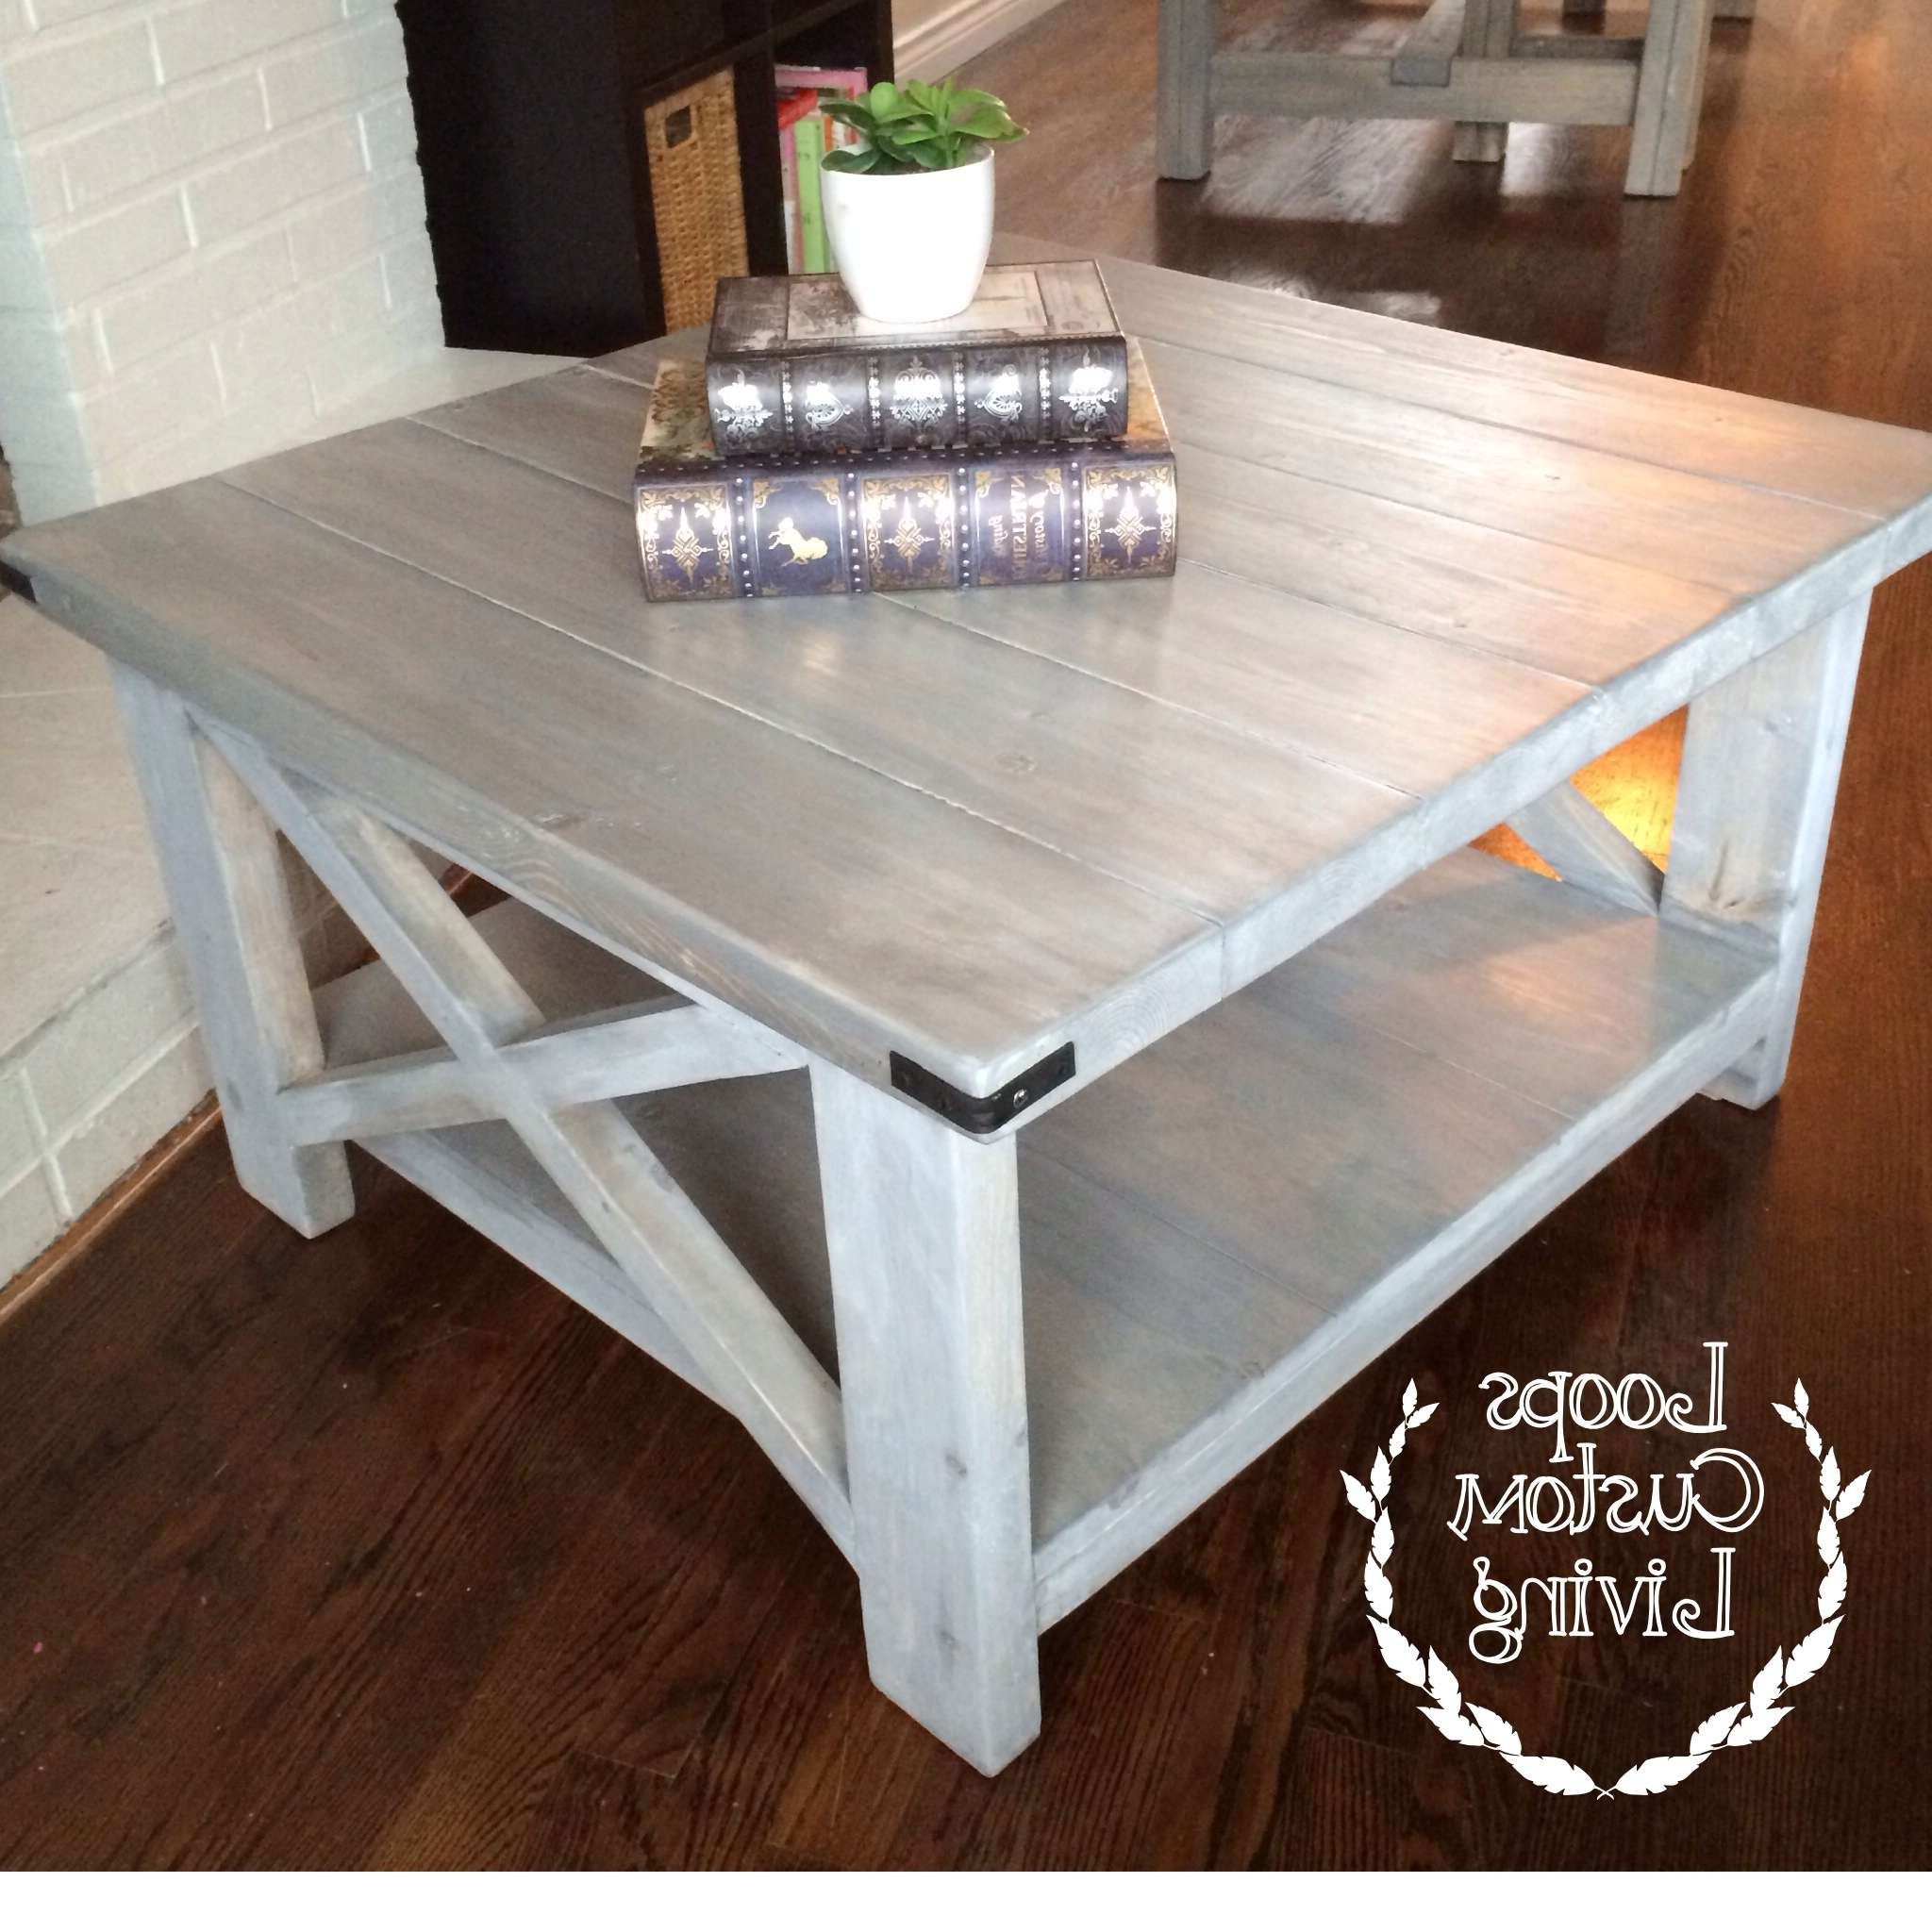 Coffee Table : Fabulous Lift Coffee Table Rustic Wood Coffee Table Within Most Recently Released Gray Wood Coffee Tables (Gallery 20 of 20)